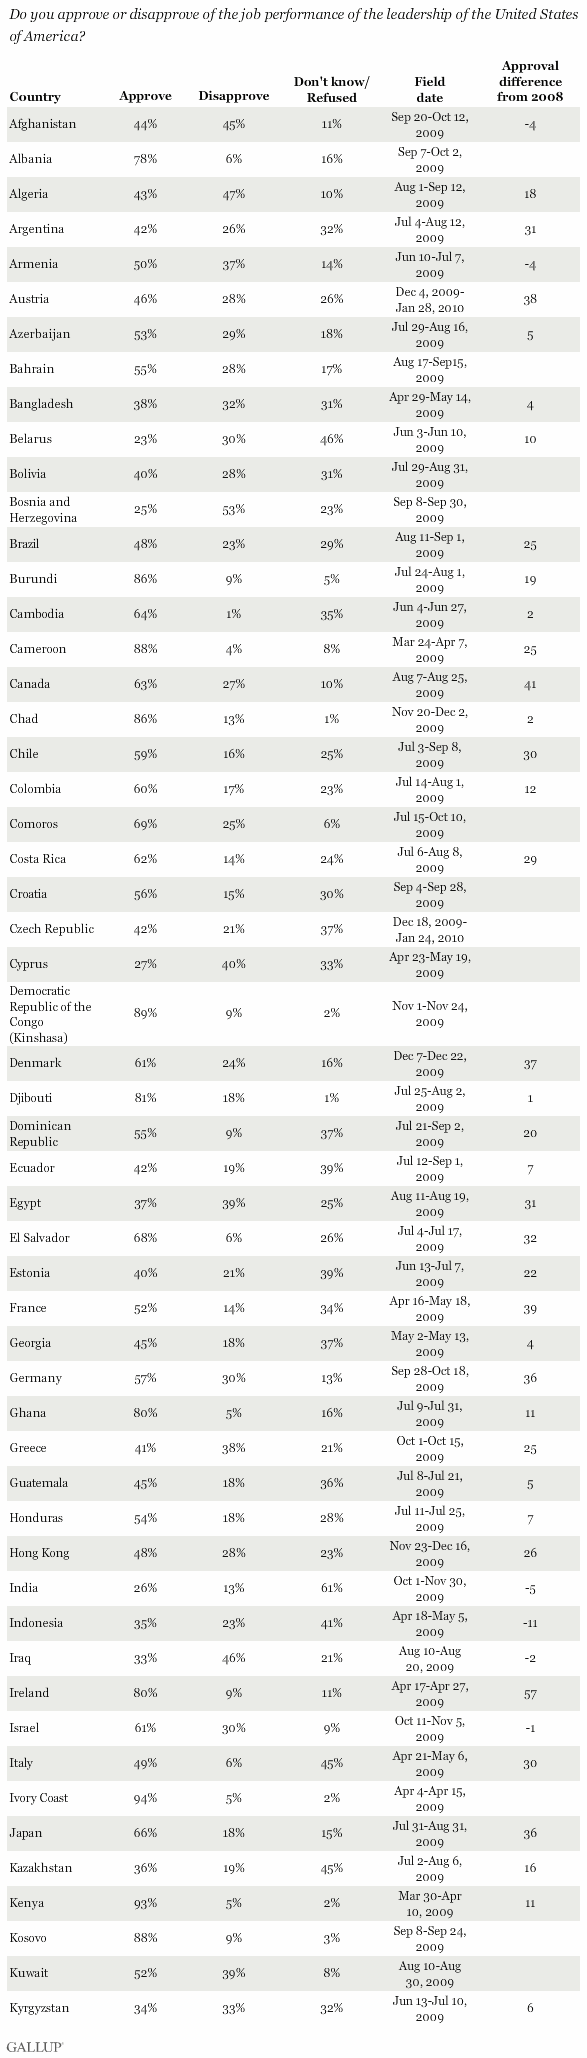 Job Performance Approval in U.S. - Countries Listed A to K